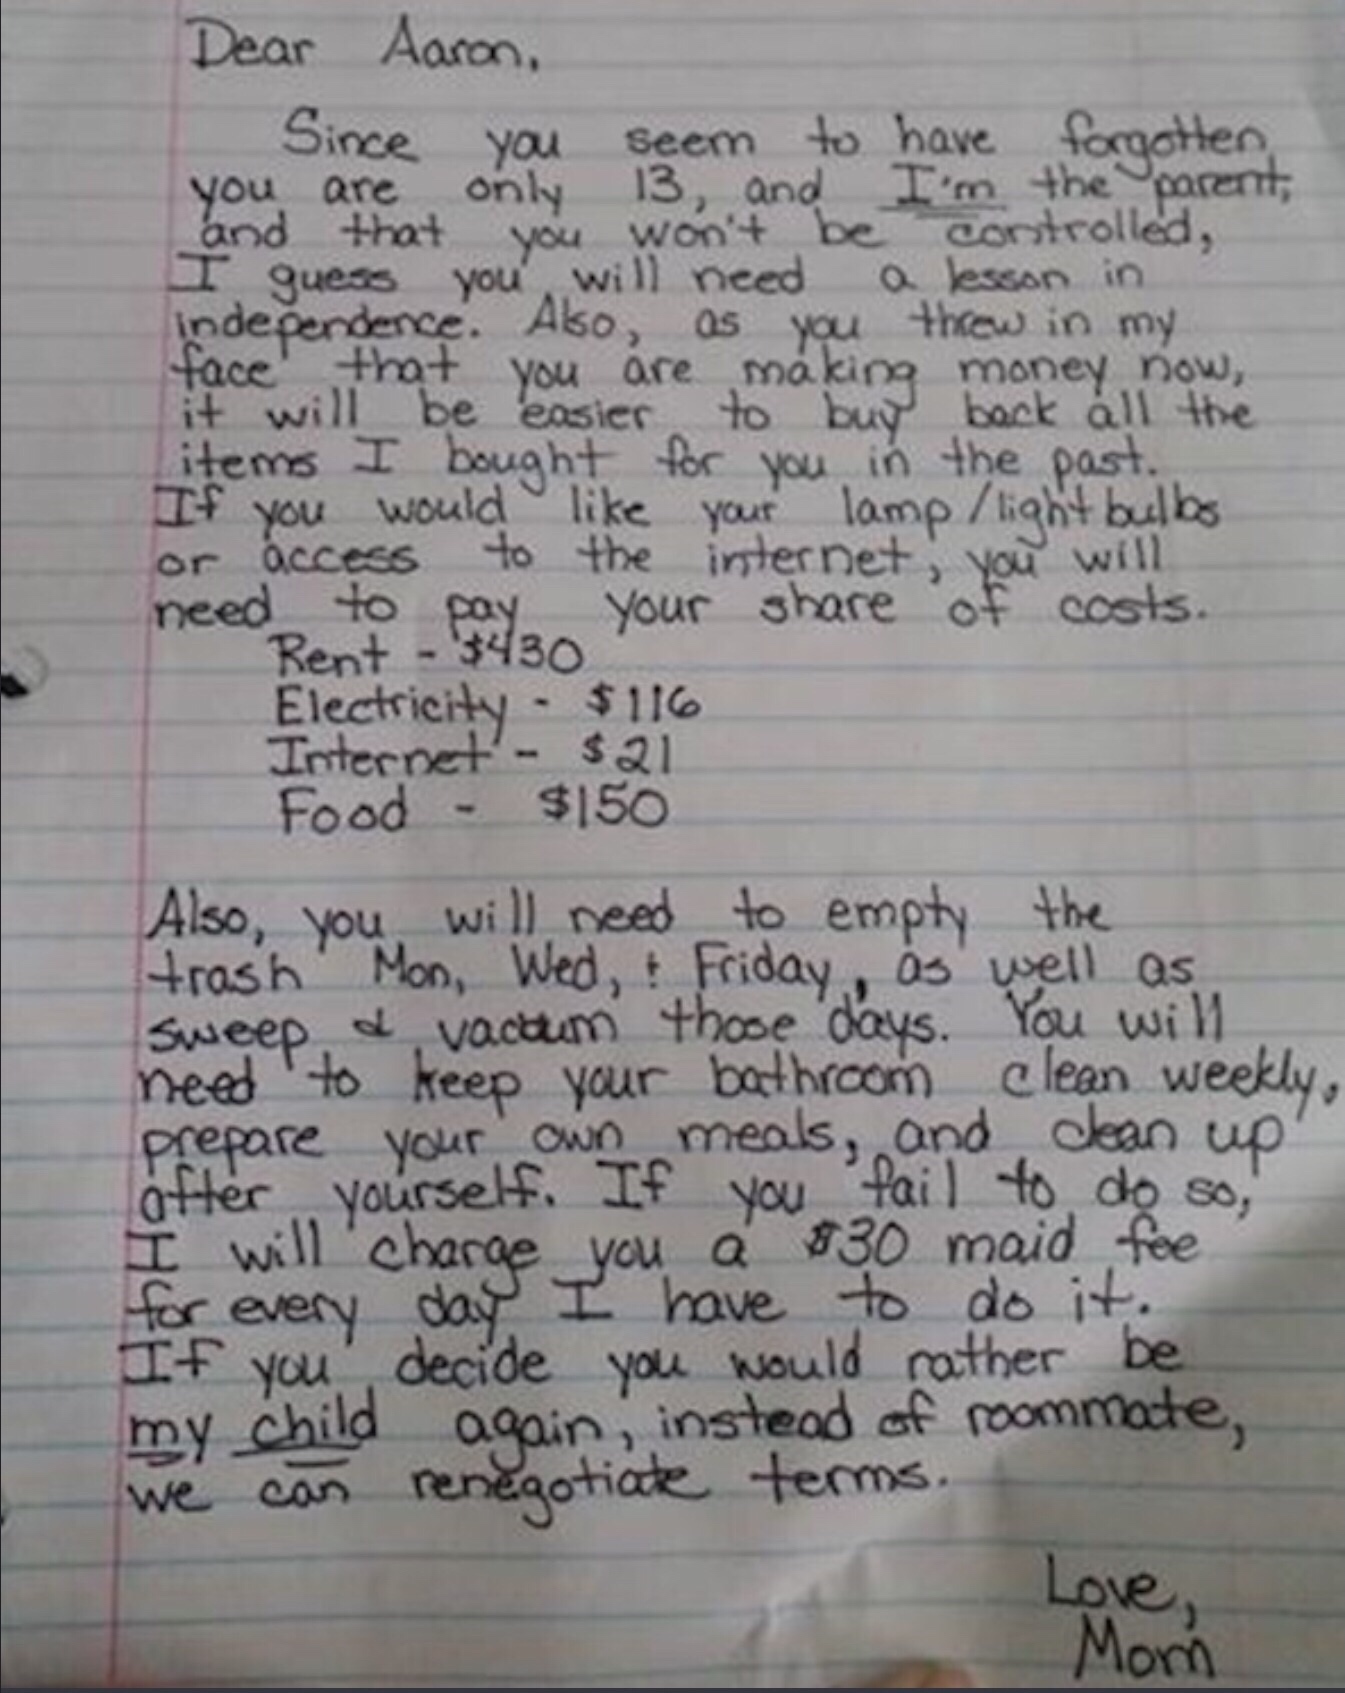 funny pics - moms letter to son - Dear Aaron, Since you seem to have forgotten, you are only 13, and I'm the corent, and that you won't be controlled, I guess you will need a lesson in independence. Also, as you throw in my face that you are making money 